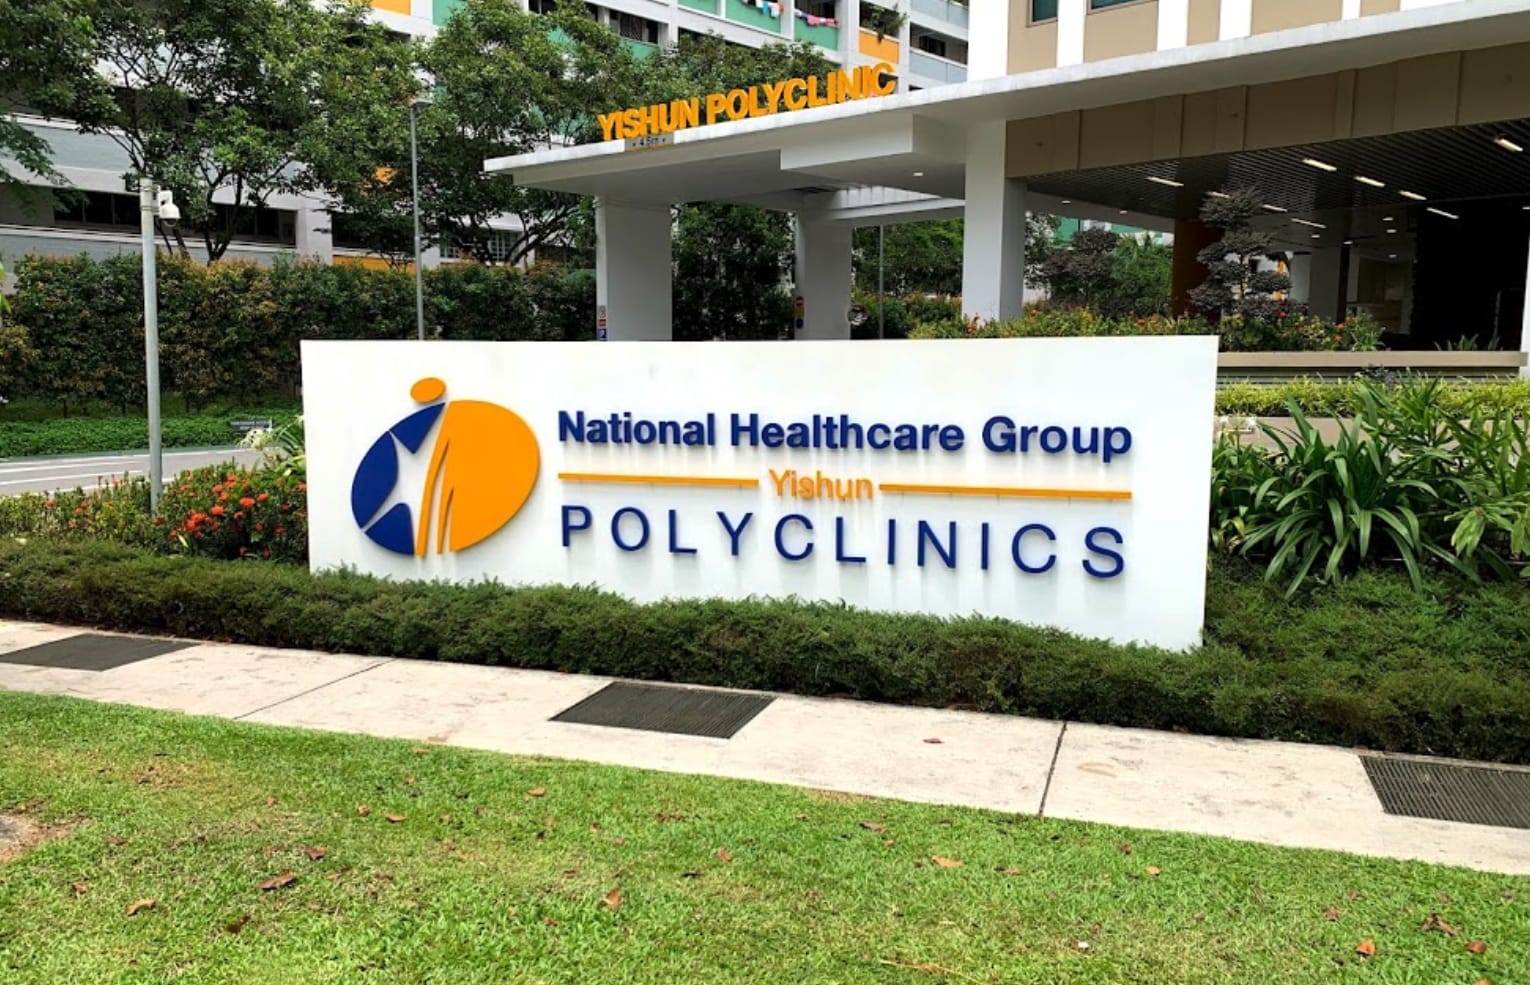 What is the difference between a clinic and a polyclinic